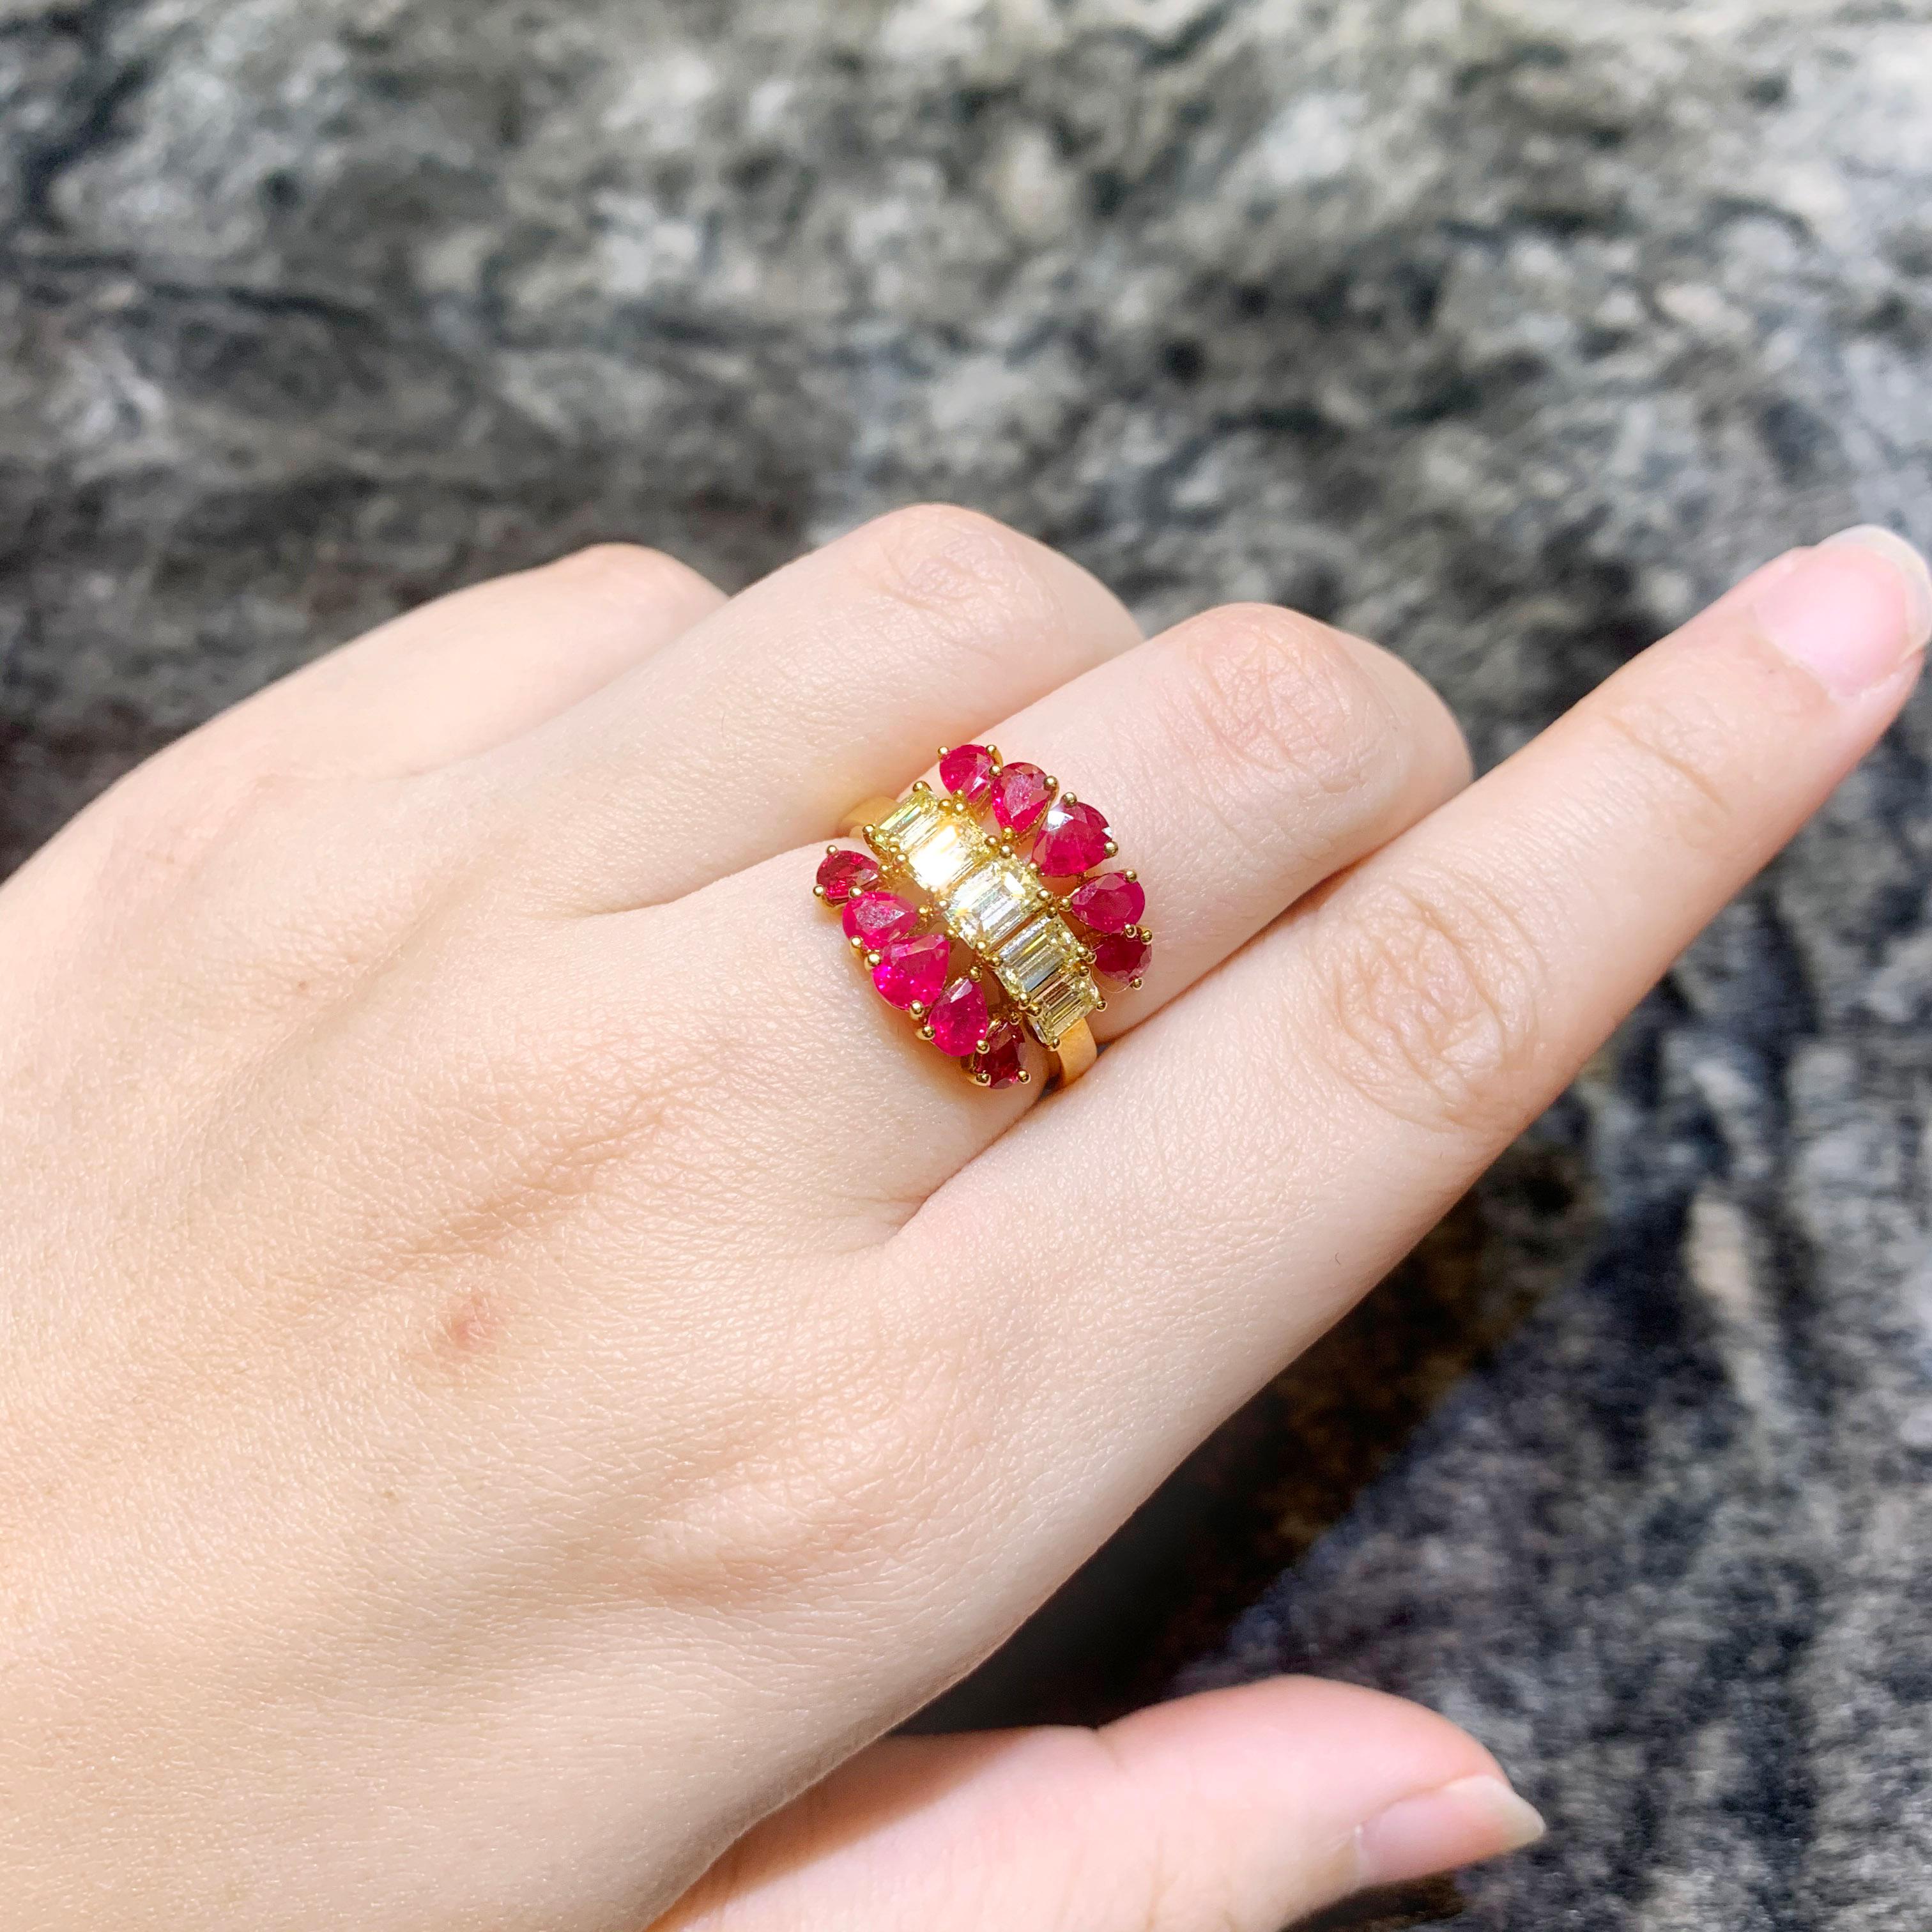 This ring from our Luxuria collection boasts of 1.28 carat of fancy light yellow emerald cut along with 2.02 carat of vivid red Mozambique rubies. The setting is very intricate which gives a 3D feel to the ring.